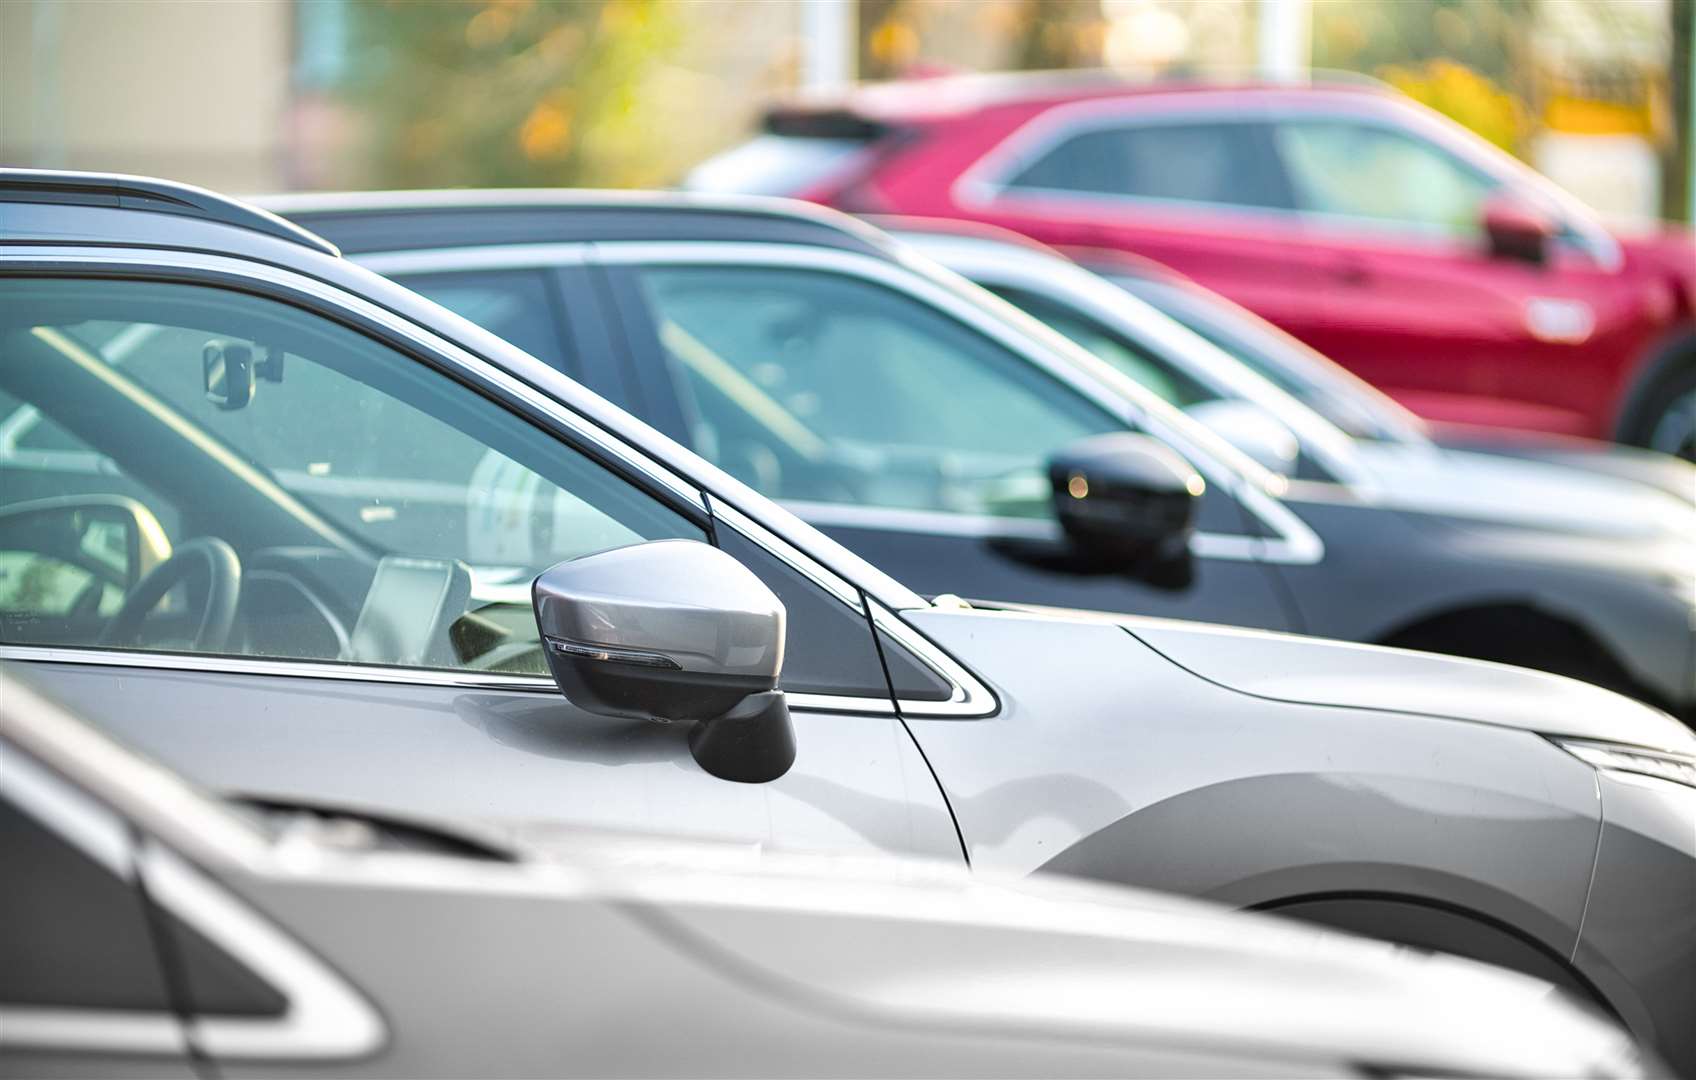 Price increases for motorists were announced in the Spring Budget. Image: iStock.